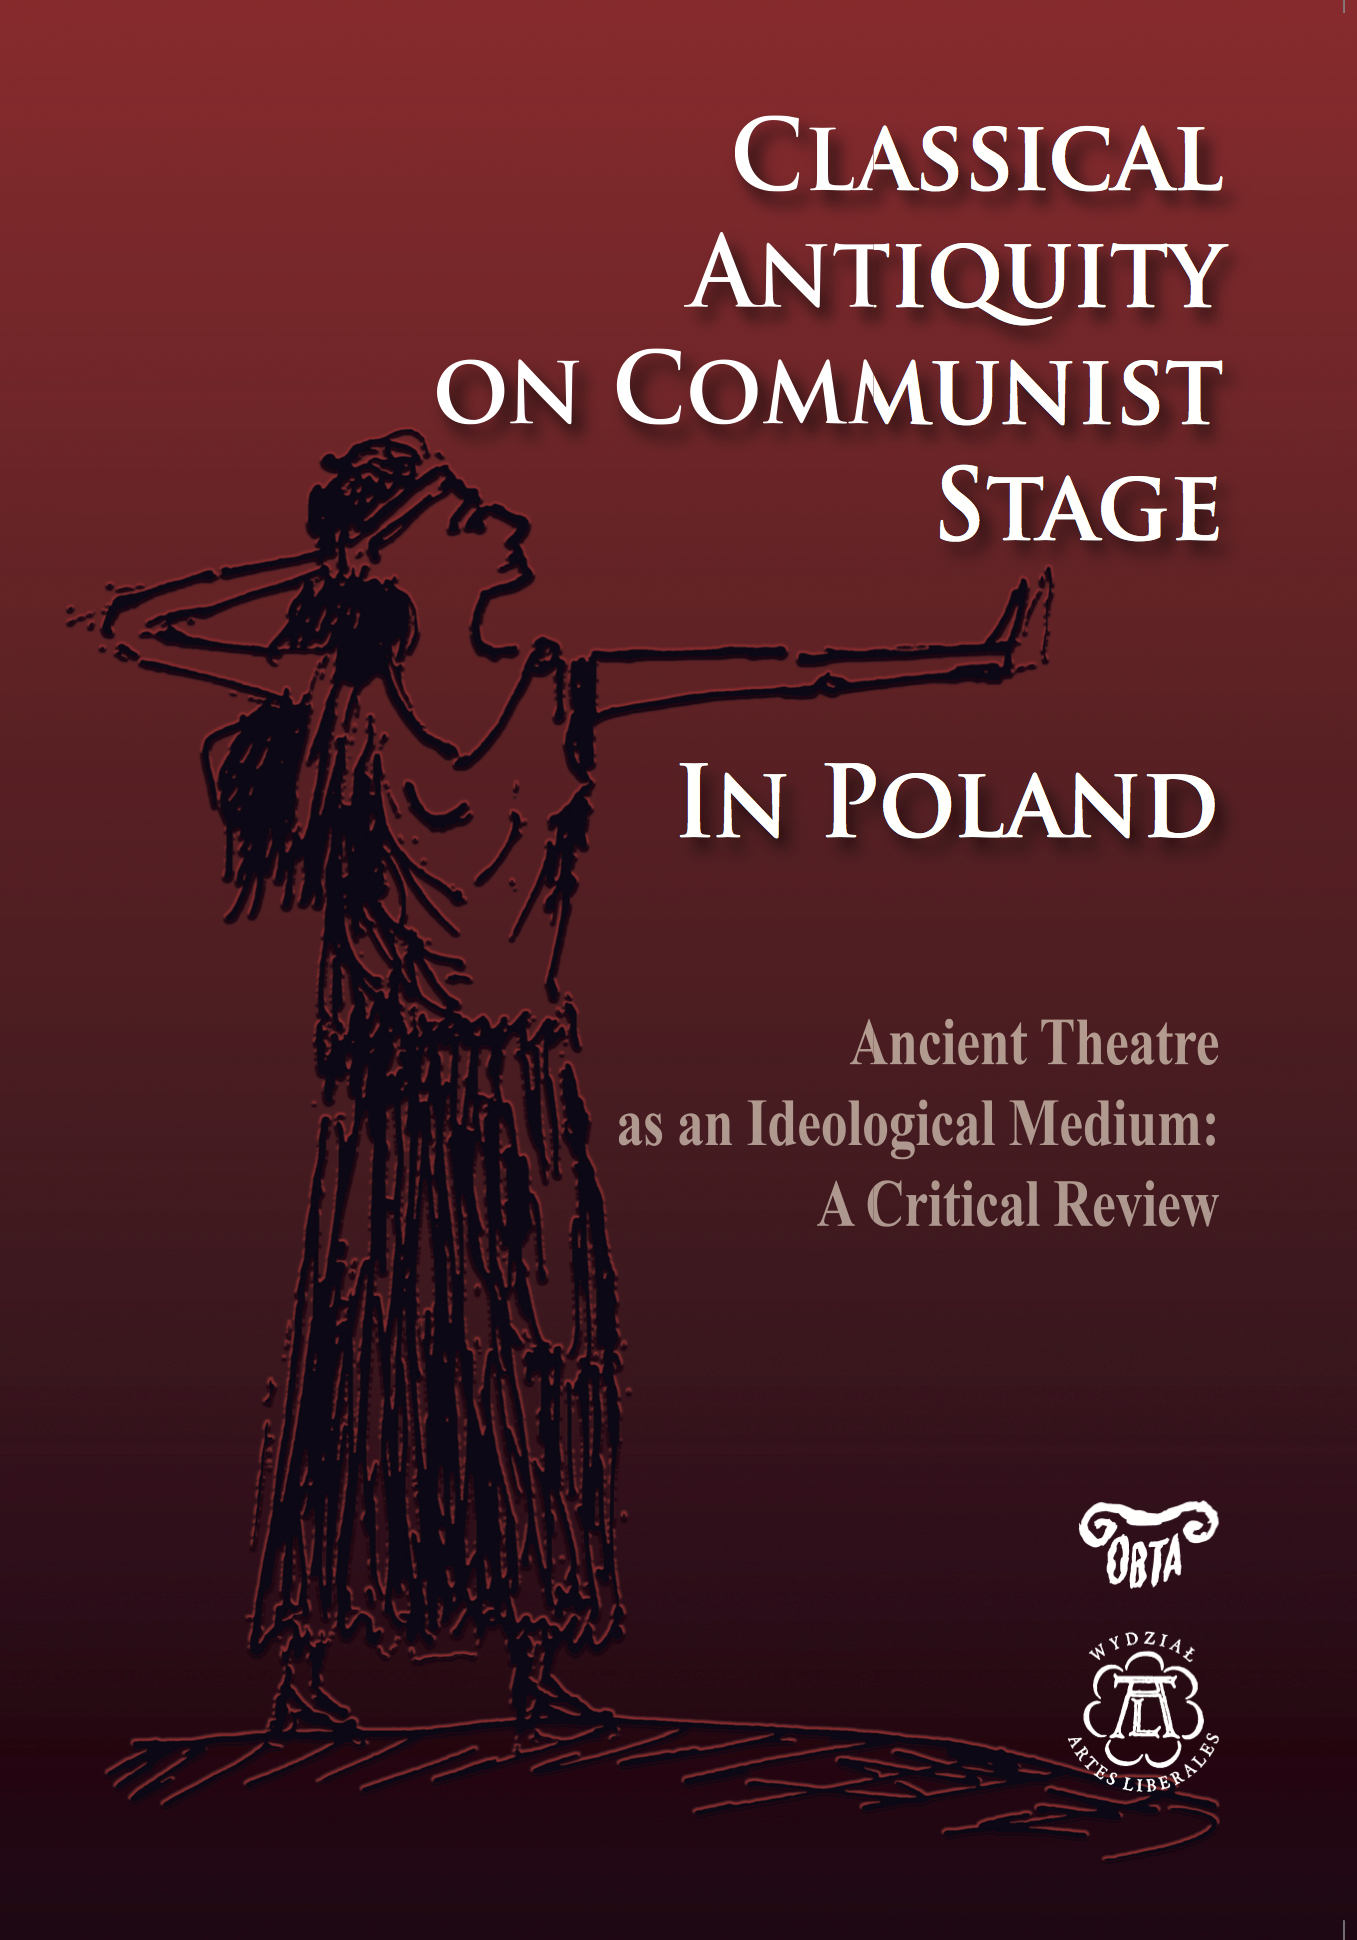 Classical Antiquity on Communist Stage in Poland. Ancient Theatre as an Ideological Medium. A Critical Review